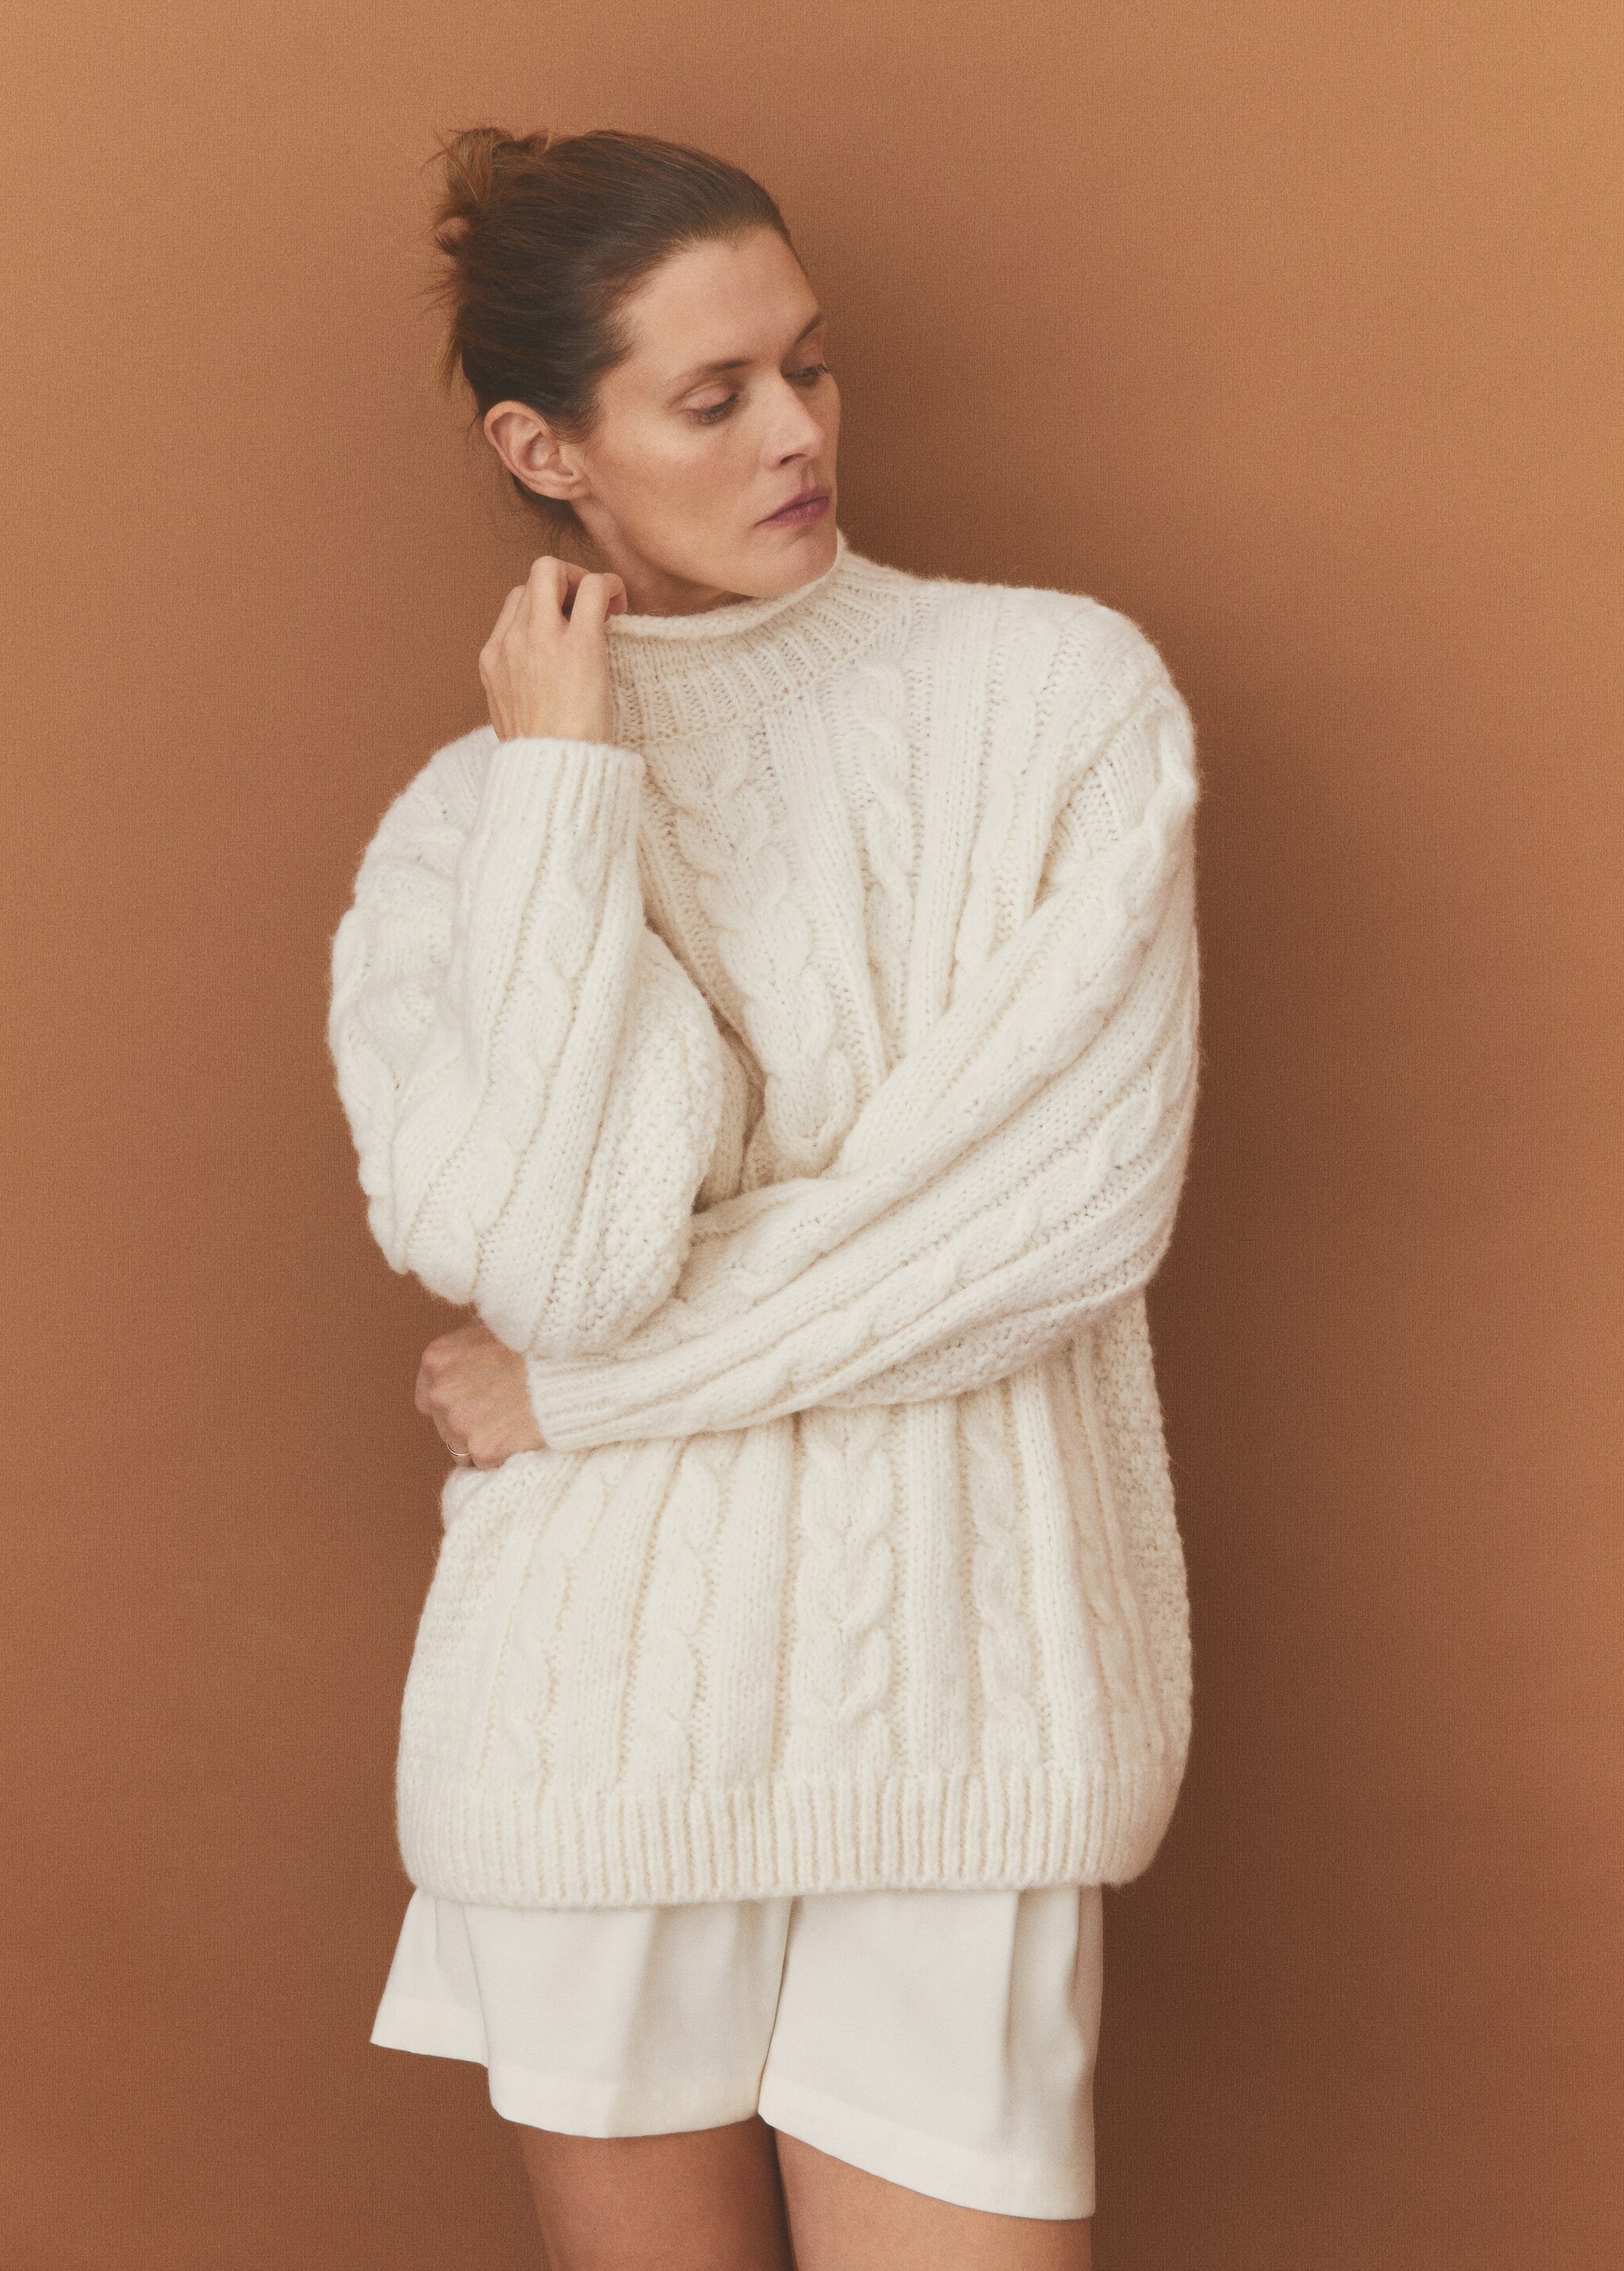 Braided wool sweater - Details of the article 6